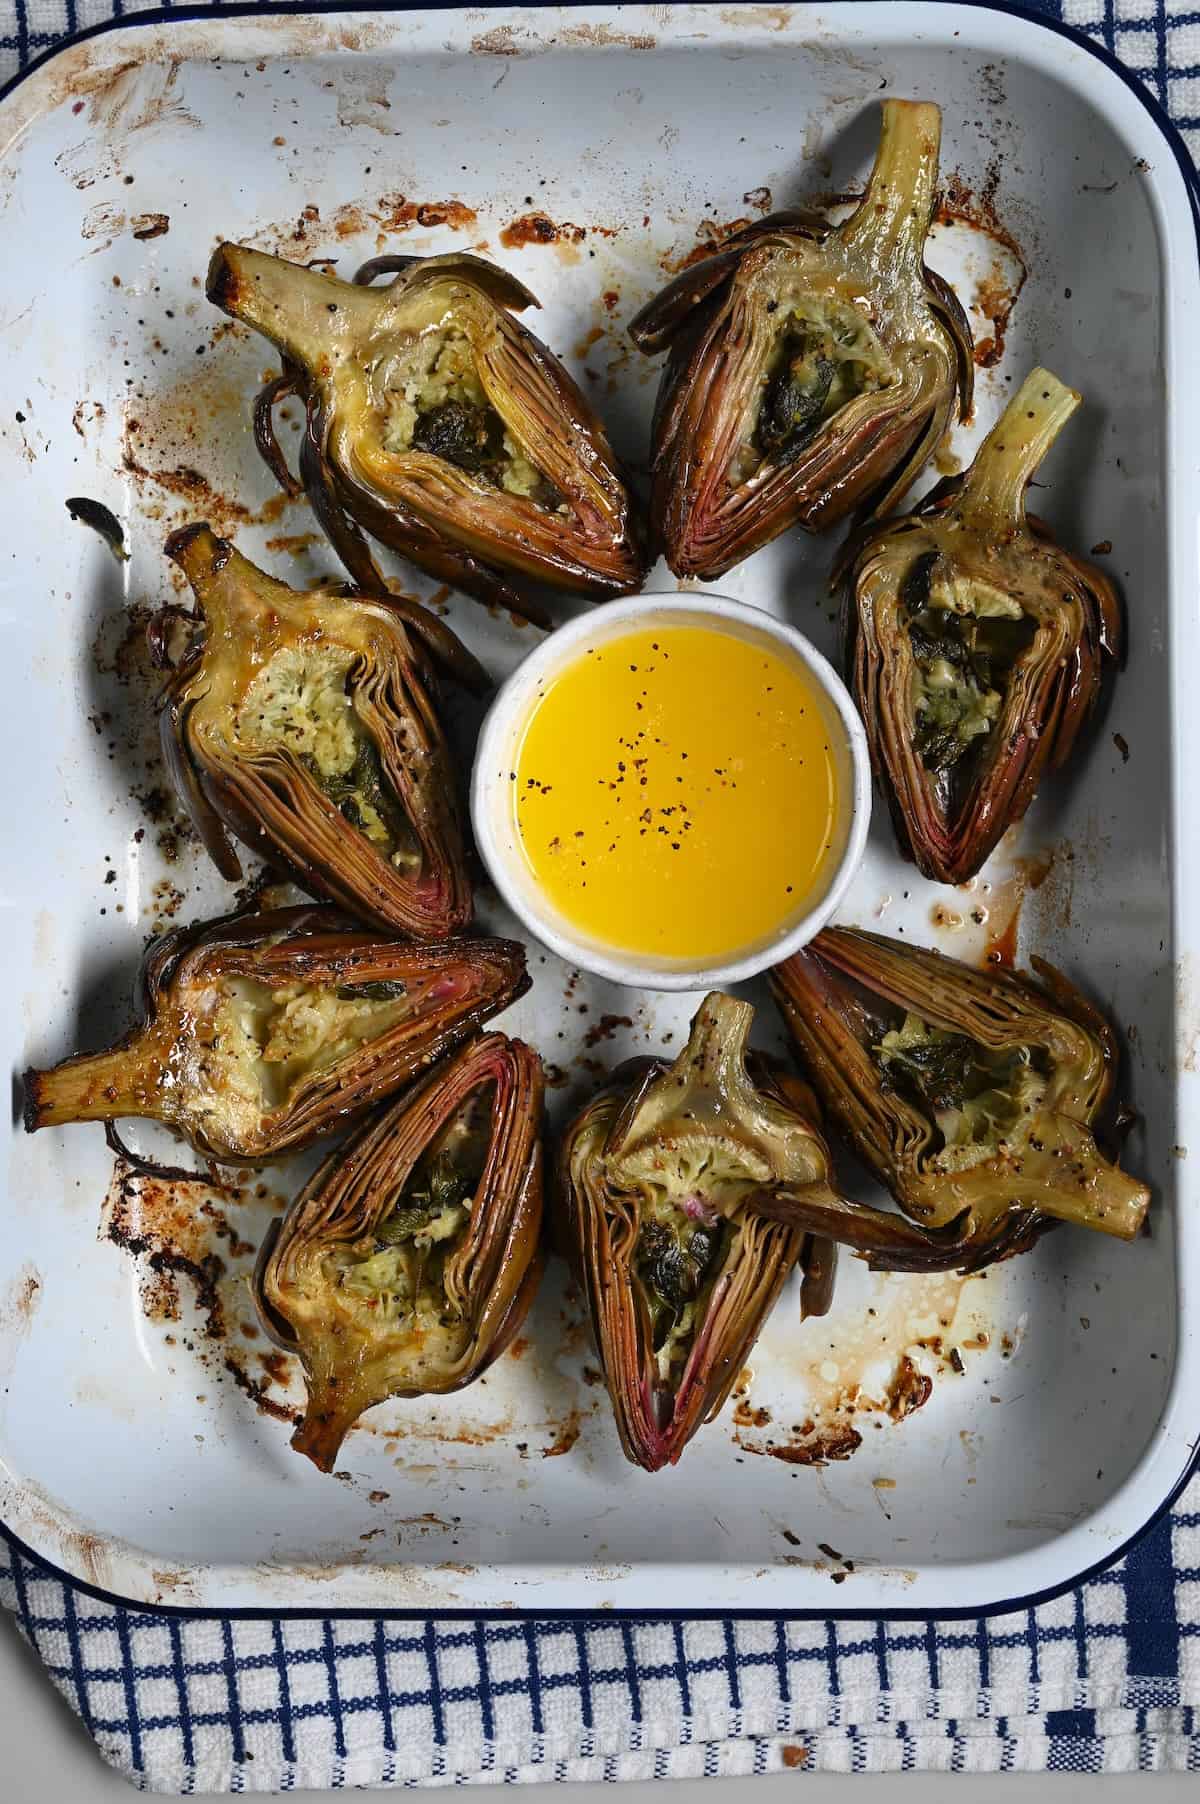 Roasted artichoke and butter sauce